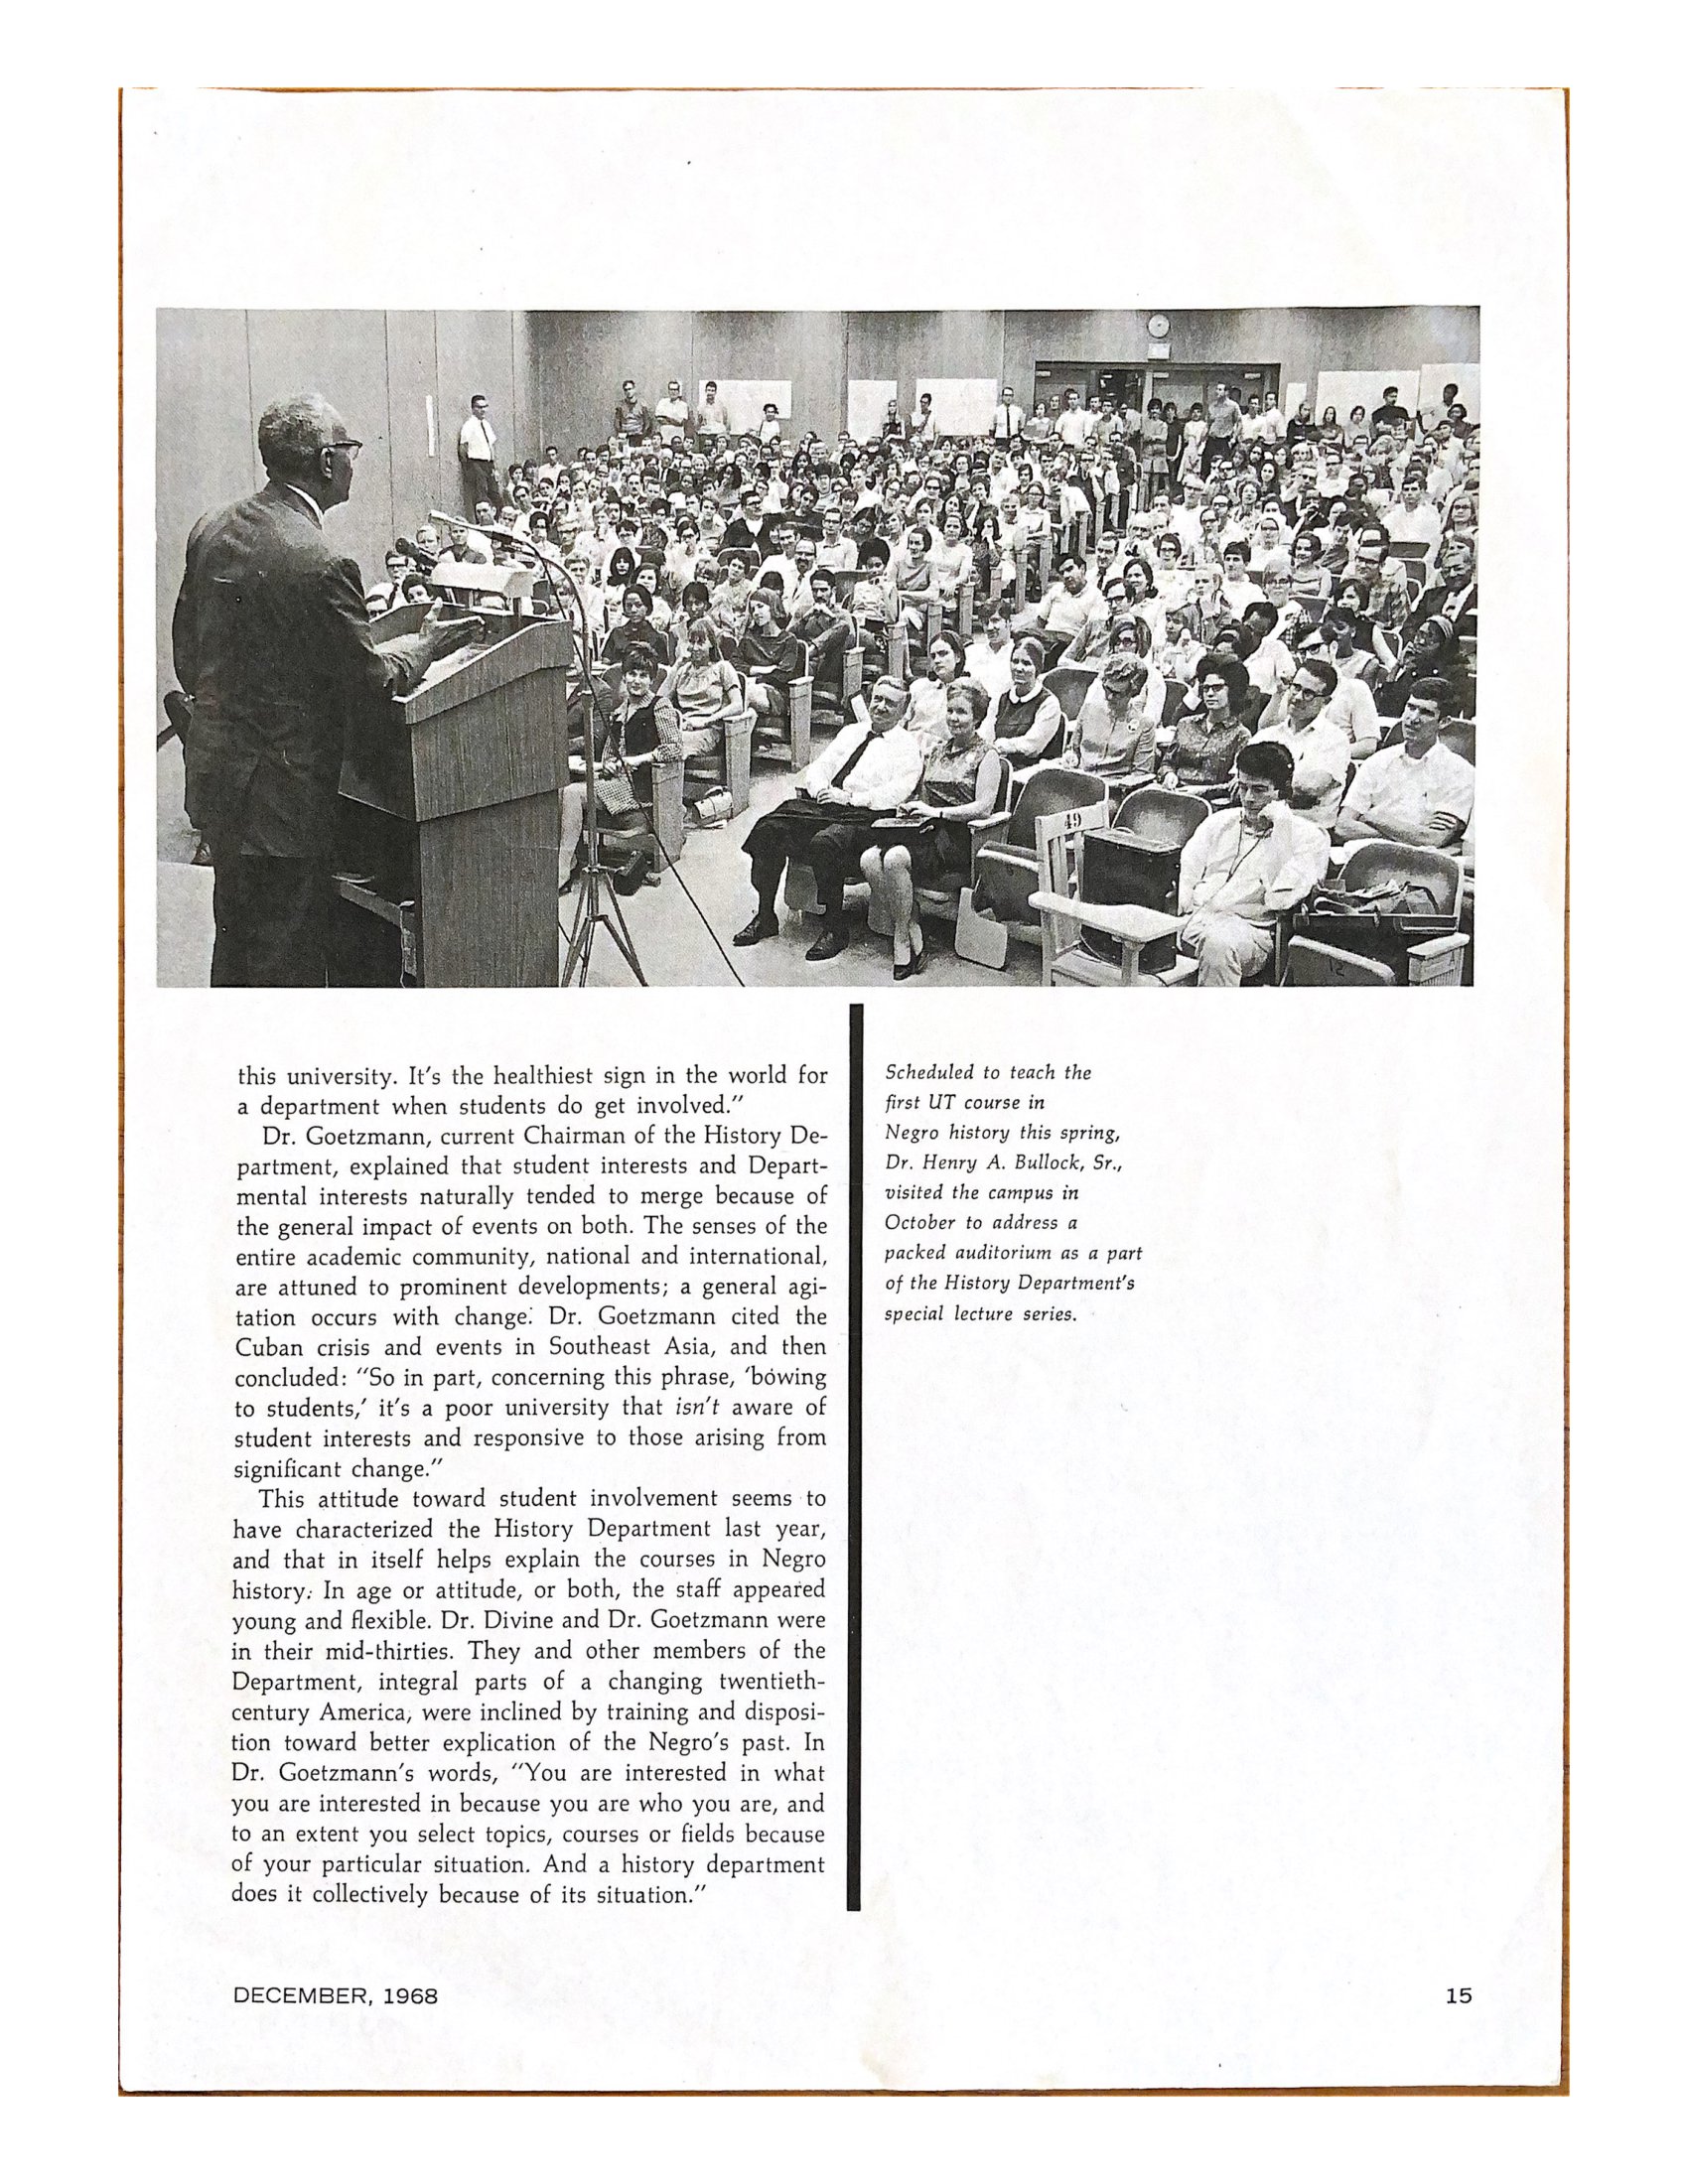 page 15 from a book dated December 1968. at the top of the page is a photo of a professor standing at a podium in from of a lecture room full of people